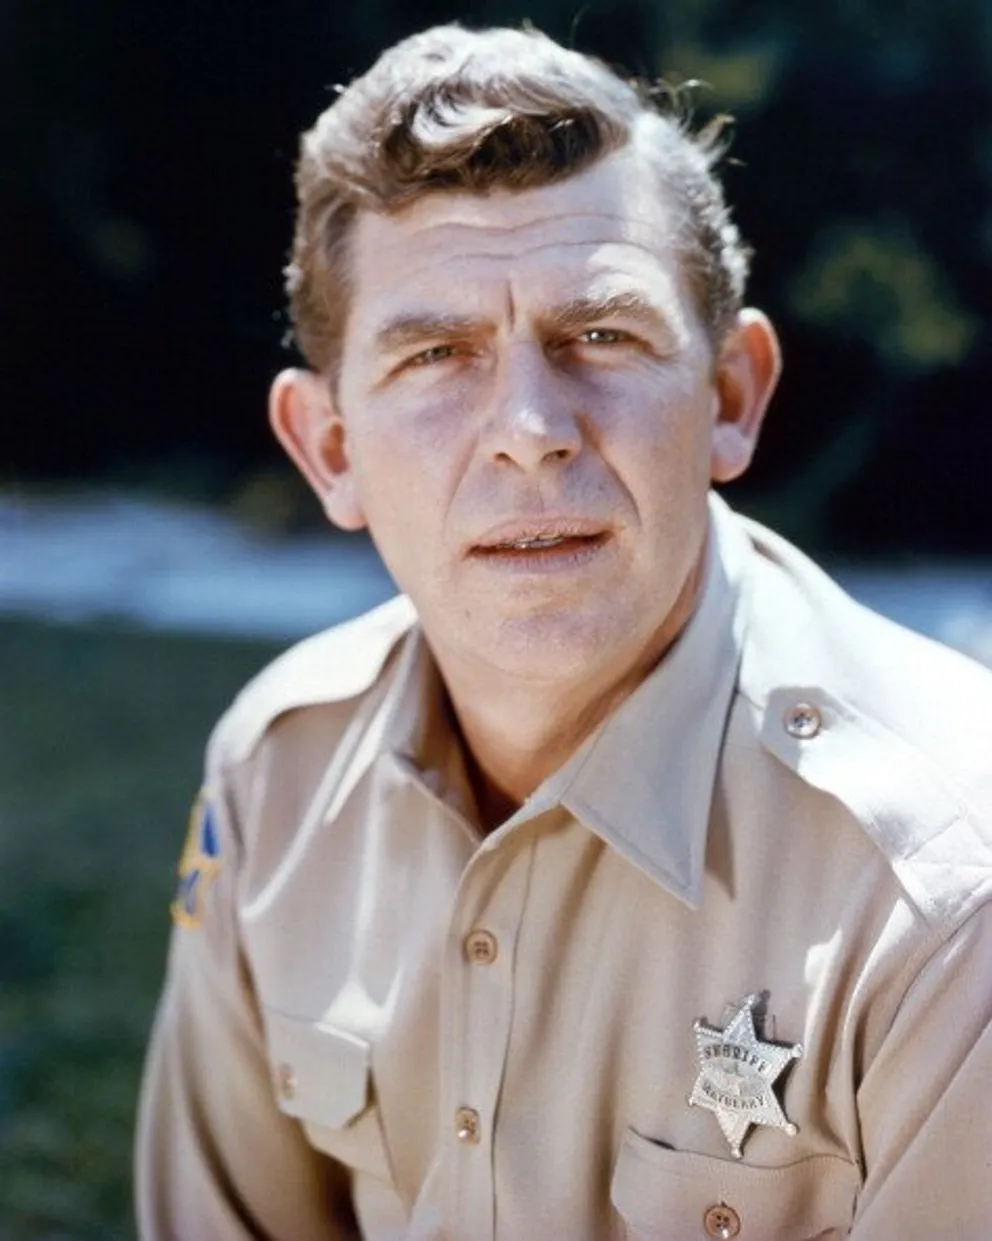 Andy Griffith in a publicity portrait issued for the TV series, "The Andy Griffith Show," circa 1965 | Photo: Getty Images